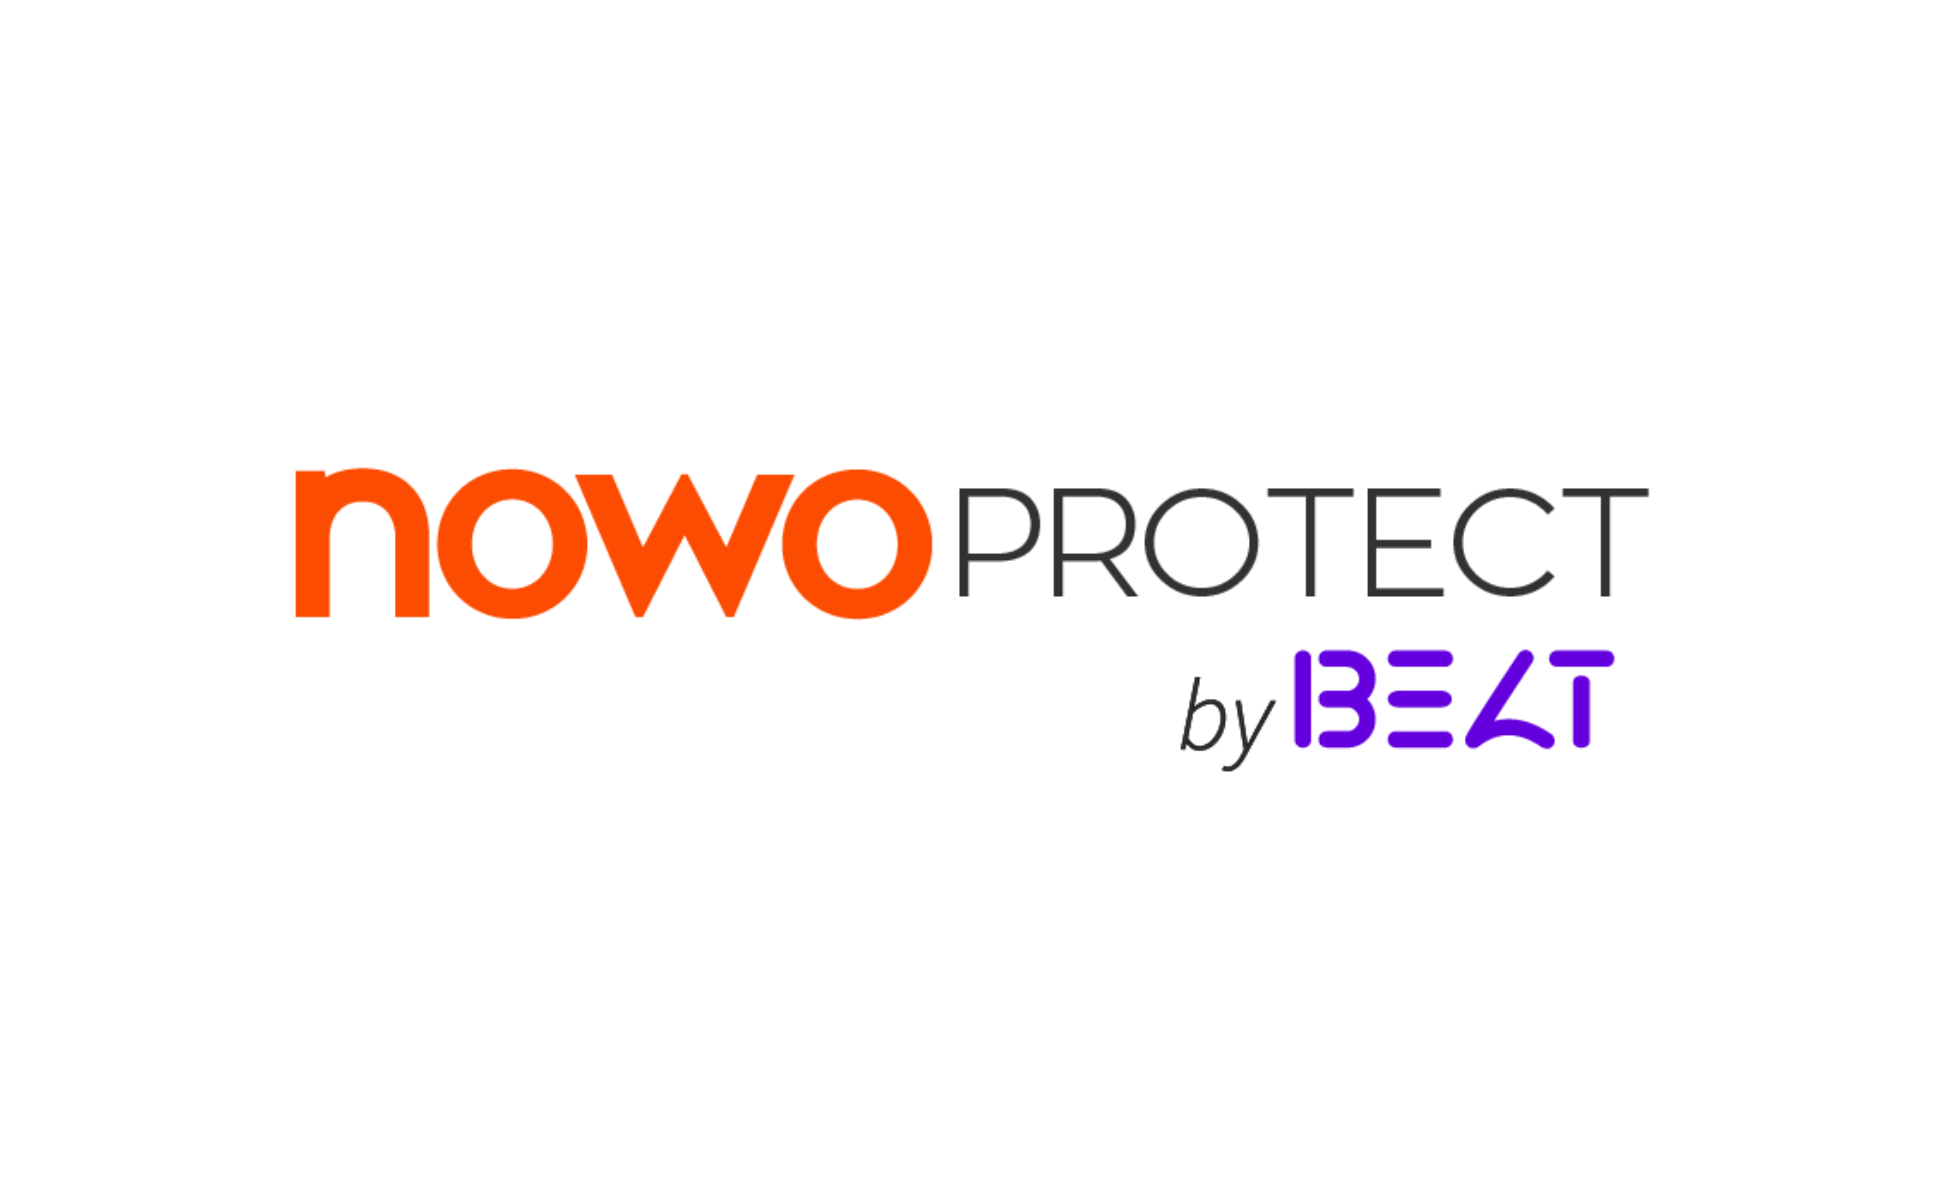 nowo-protect-by-belt